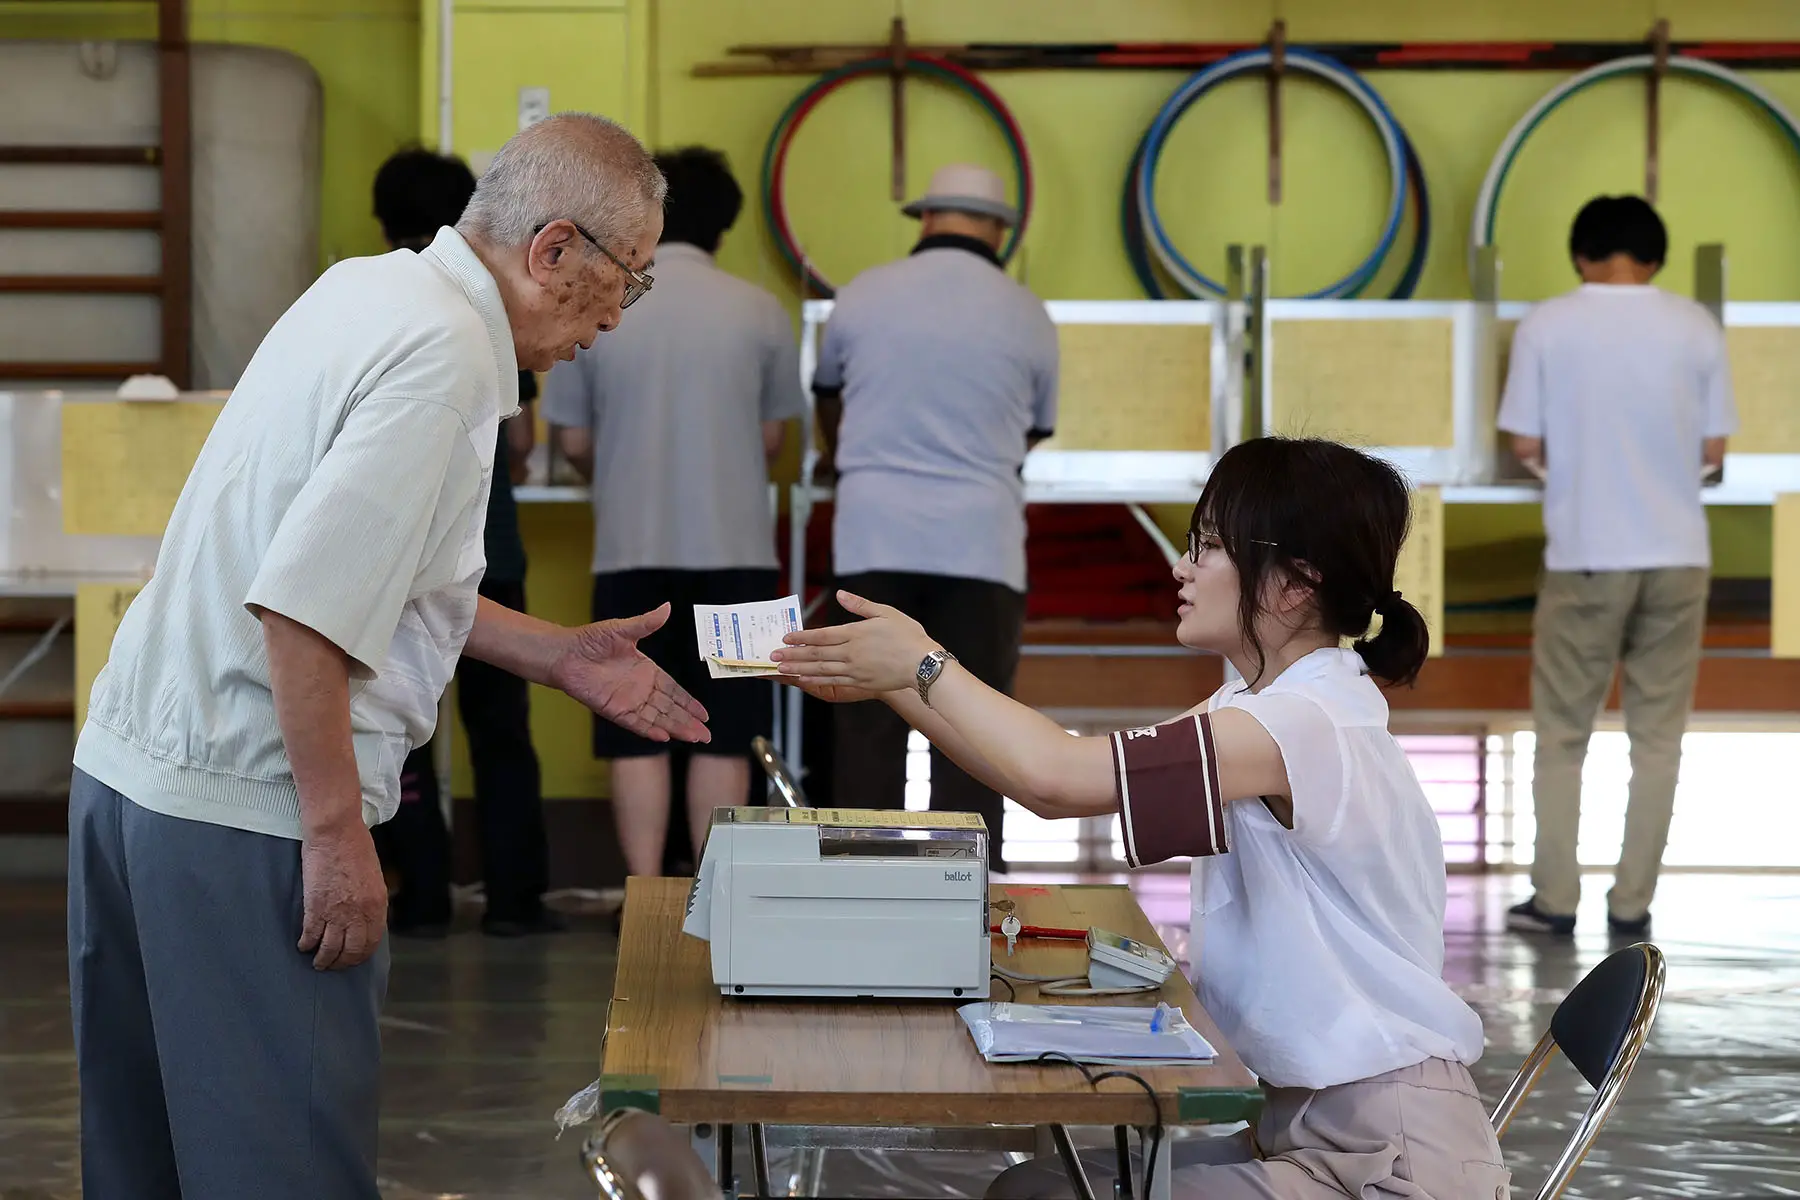 A voter receives a ballot paper in Japan's 2016 Upper House election at a polling station in Tokyo, Japan.